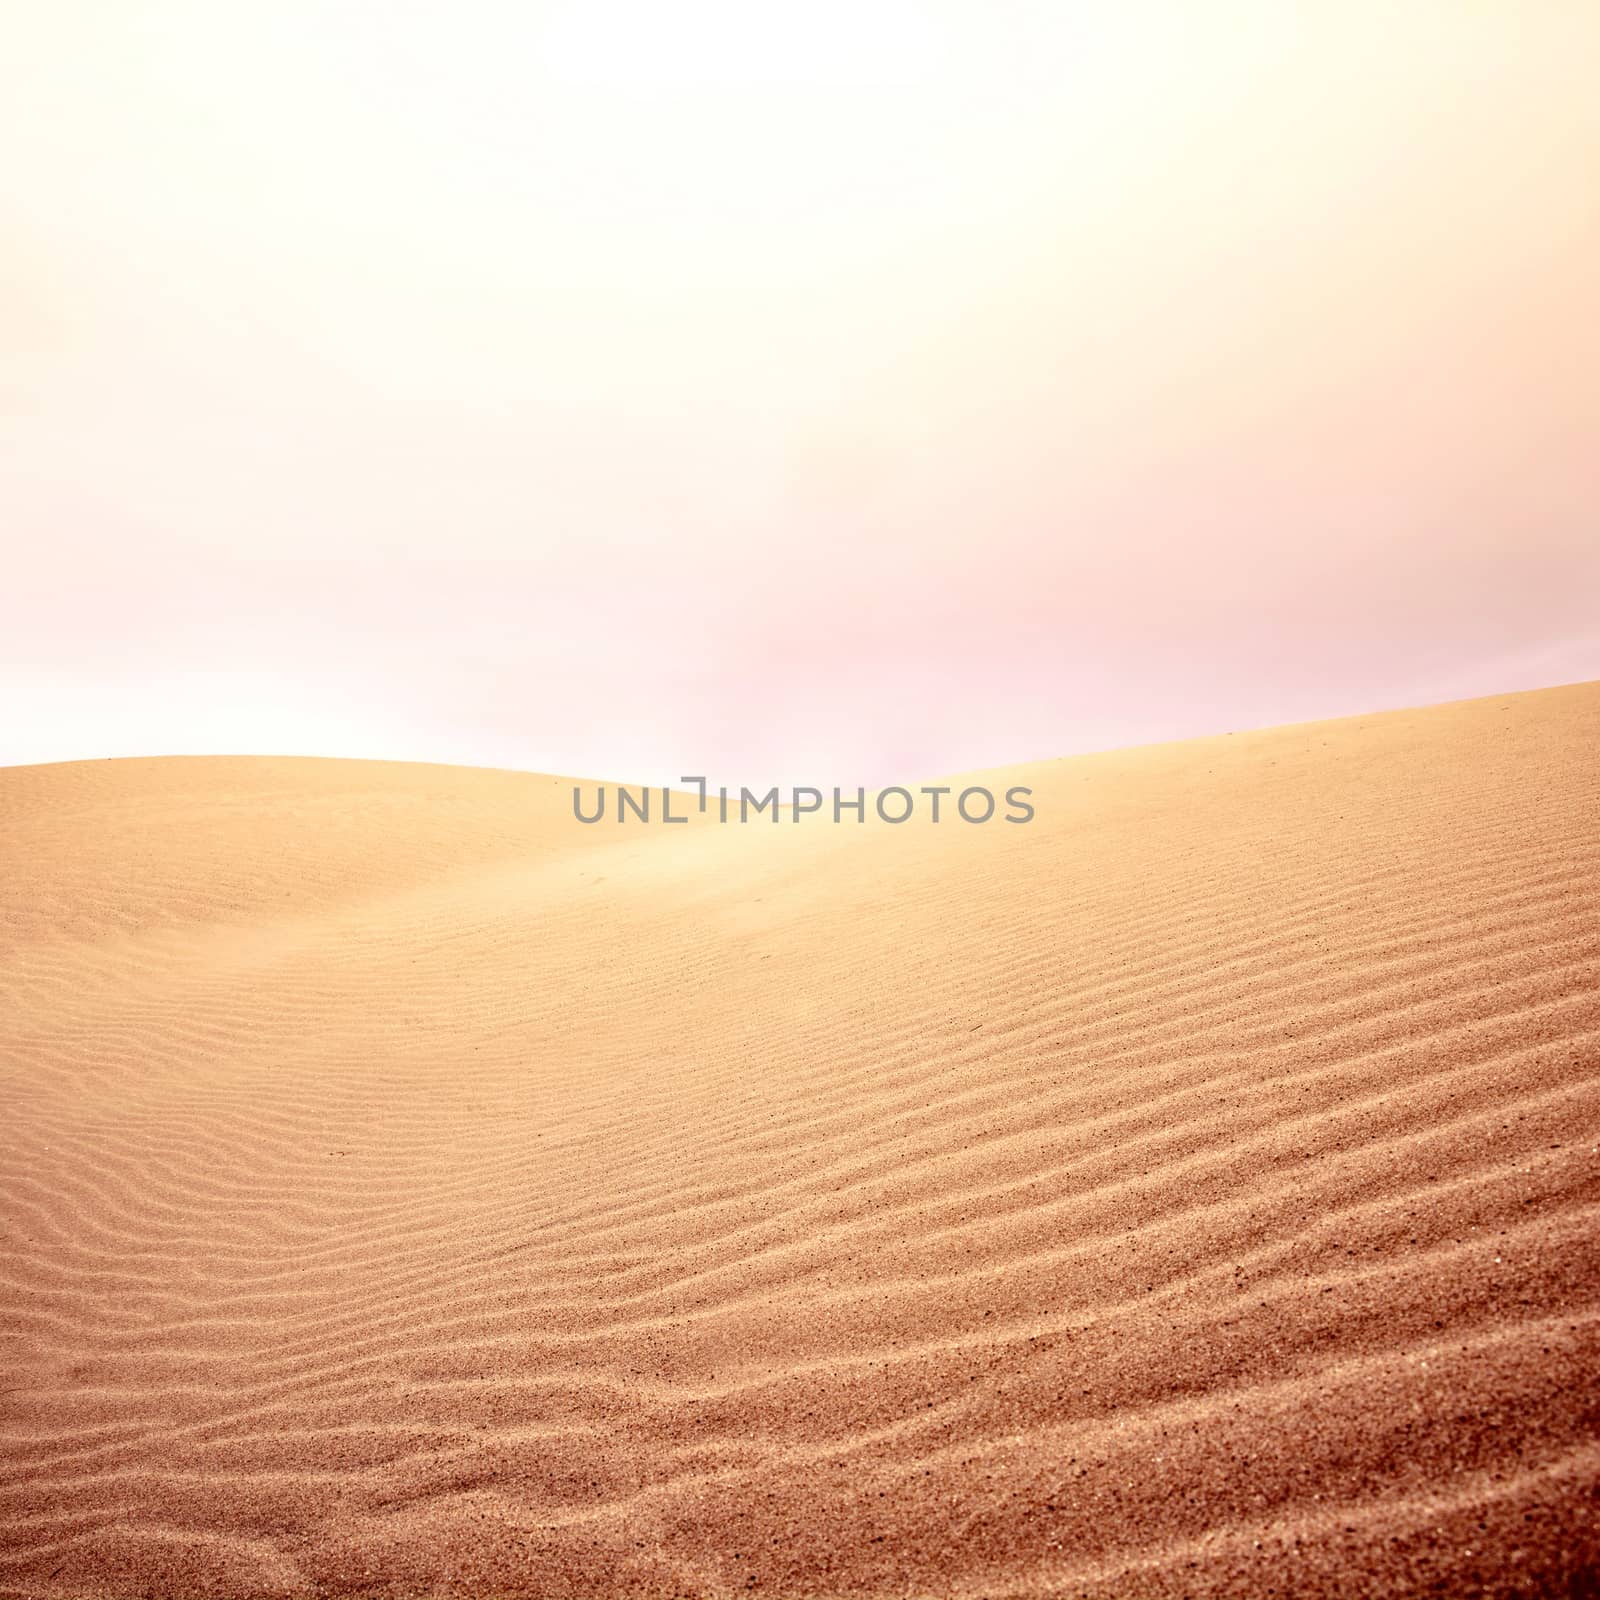 Sand dunes and sky. Hot day in the desert. Nature landscape.